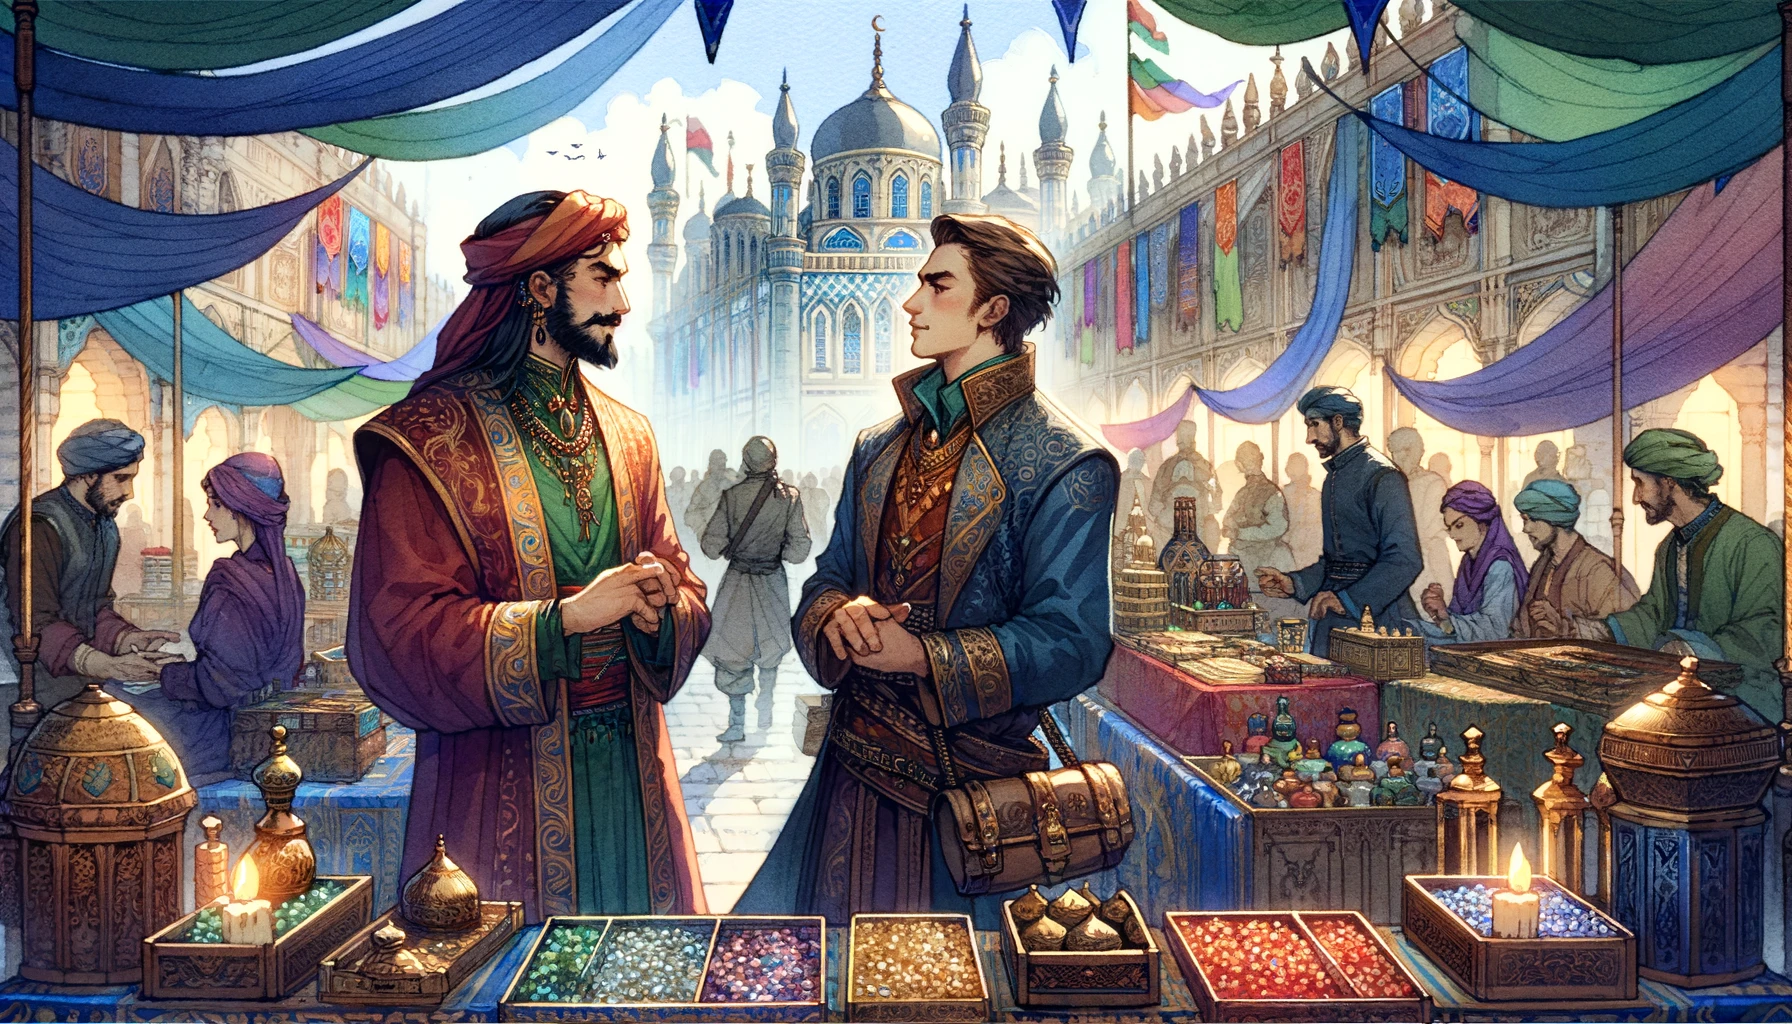 Marketplace Negotiation at the Royal City: A wide watercolor art style illustration of two characters negotiating in a bustling royal marketplace. One character, a merchant with colorful robes and exotic wares, is discussing terms with a noble adventurer, who has a determined look. The marketplace is filled with vibrant stalls, decorated with flags and banners, and a backdrop of grand architecture.